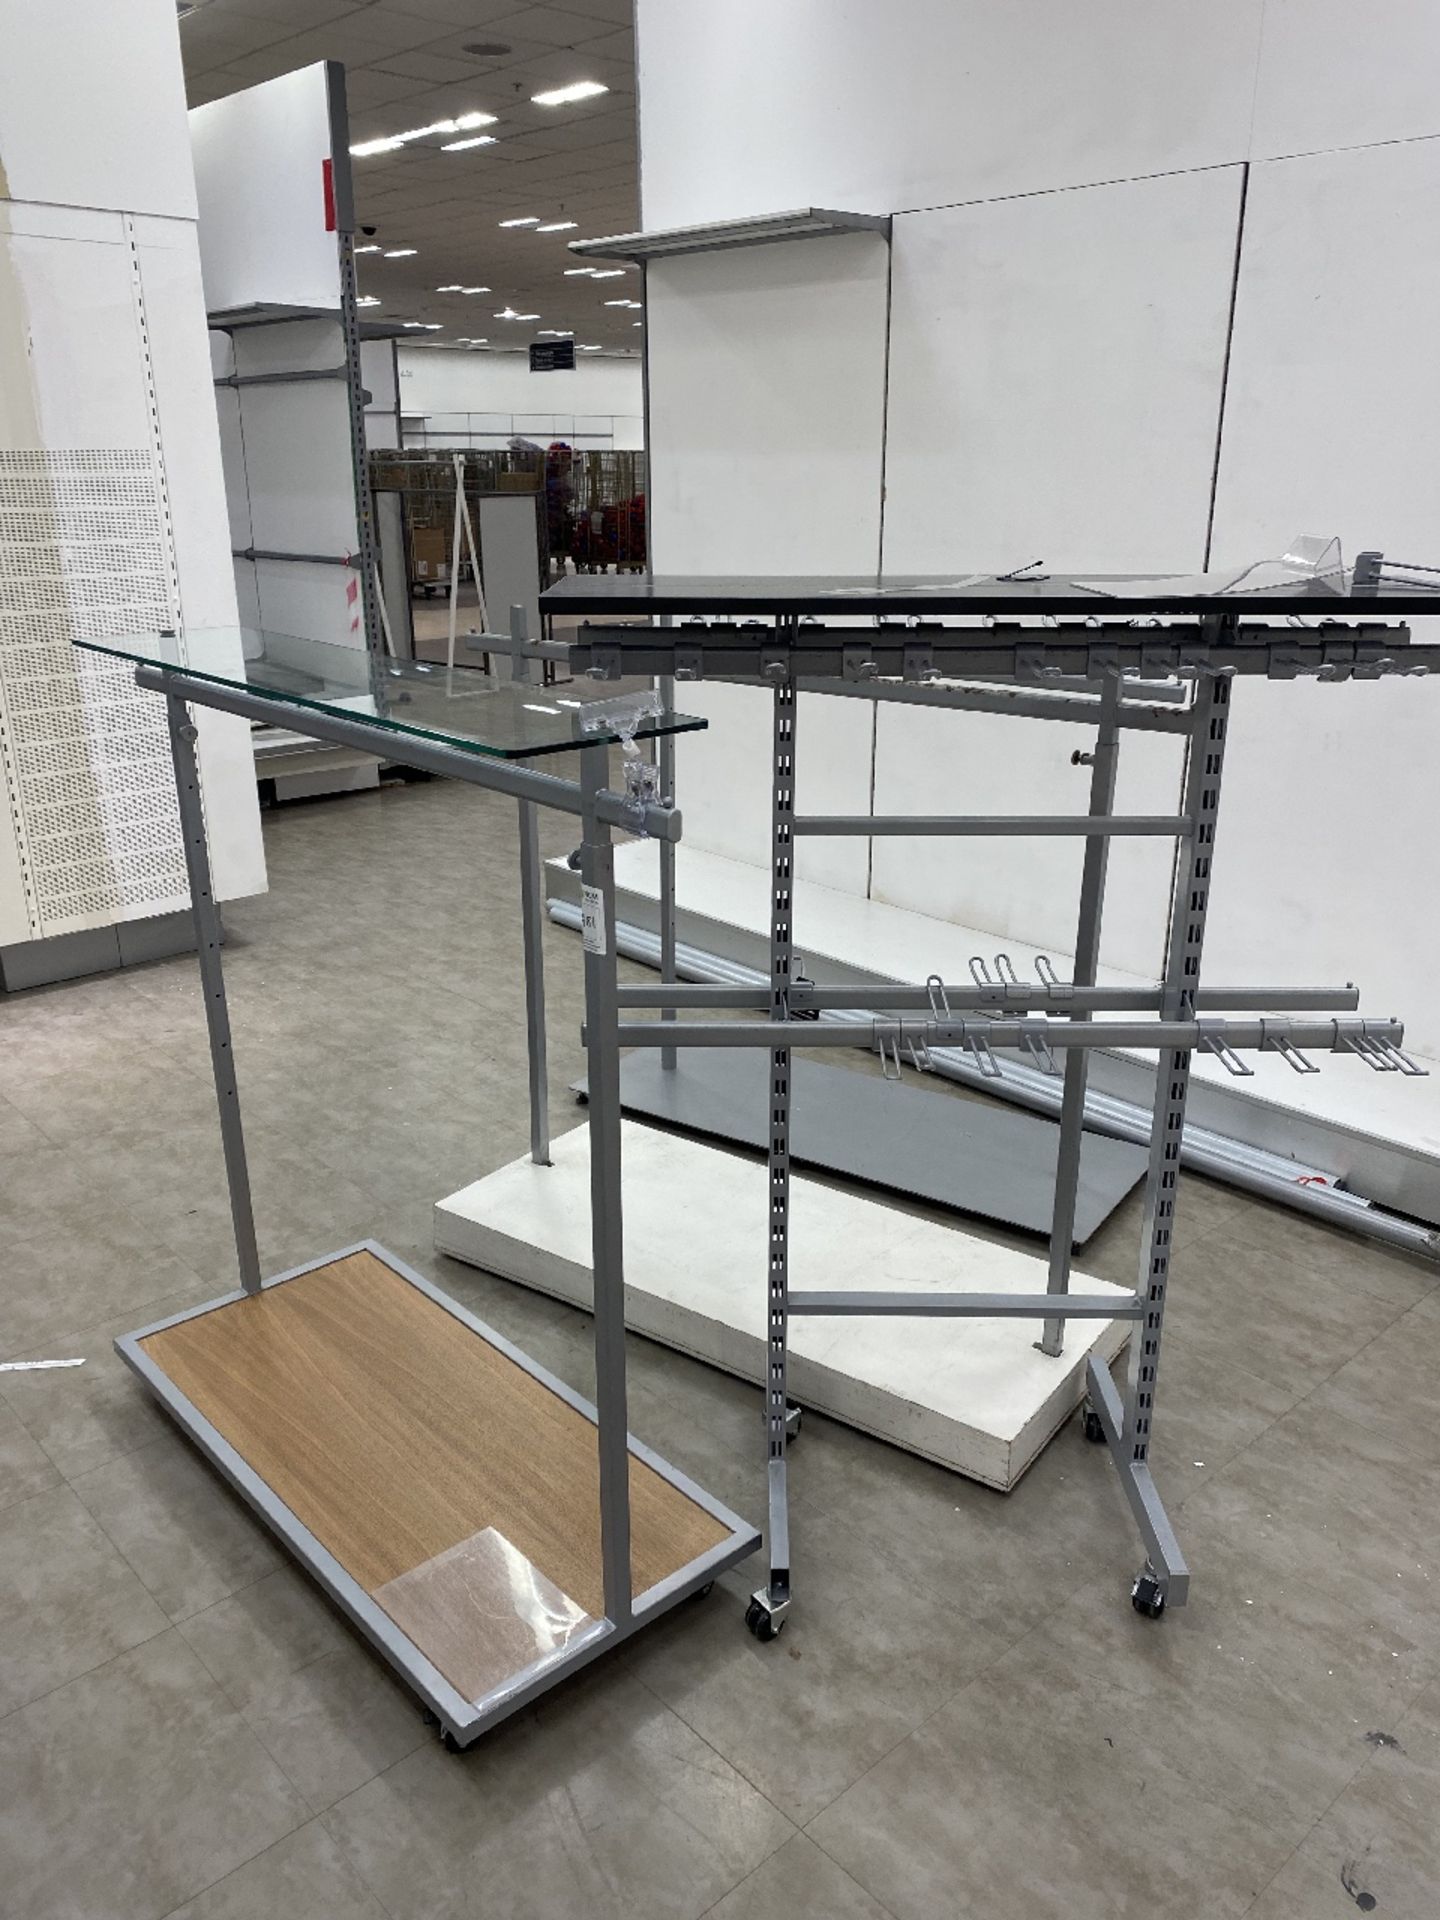 4 x free stading clothes rails - Image 2 of 2